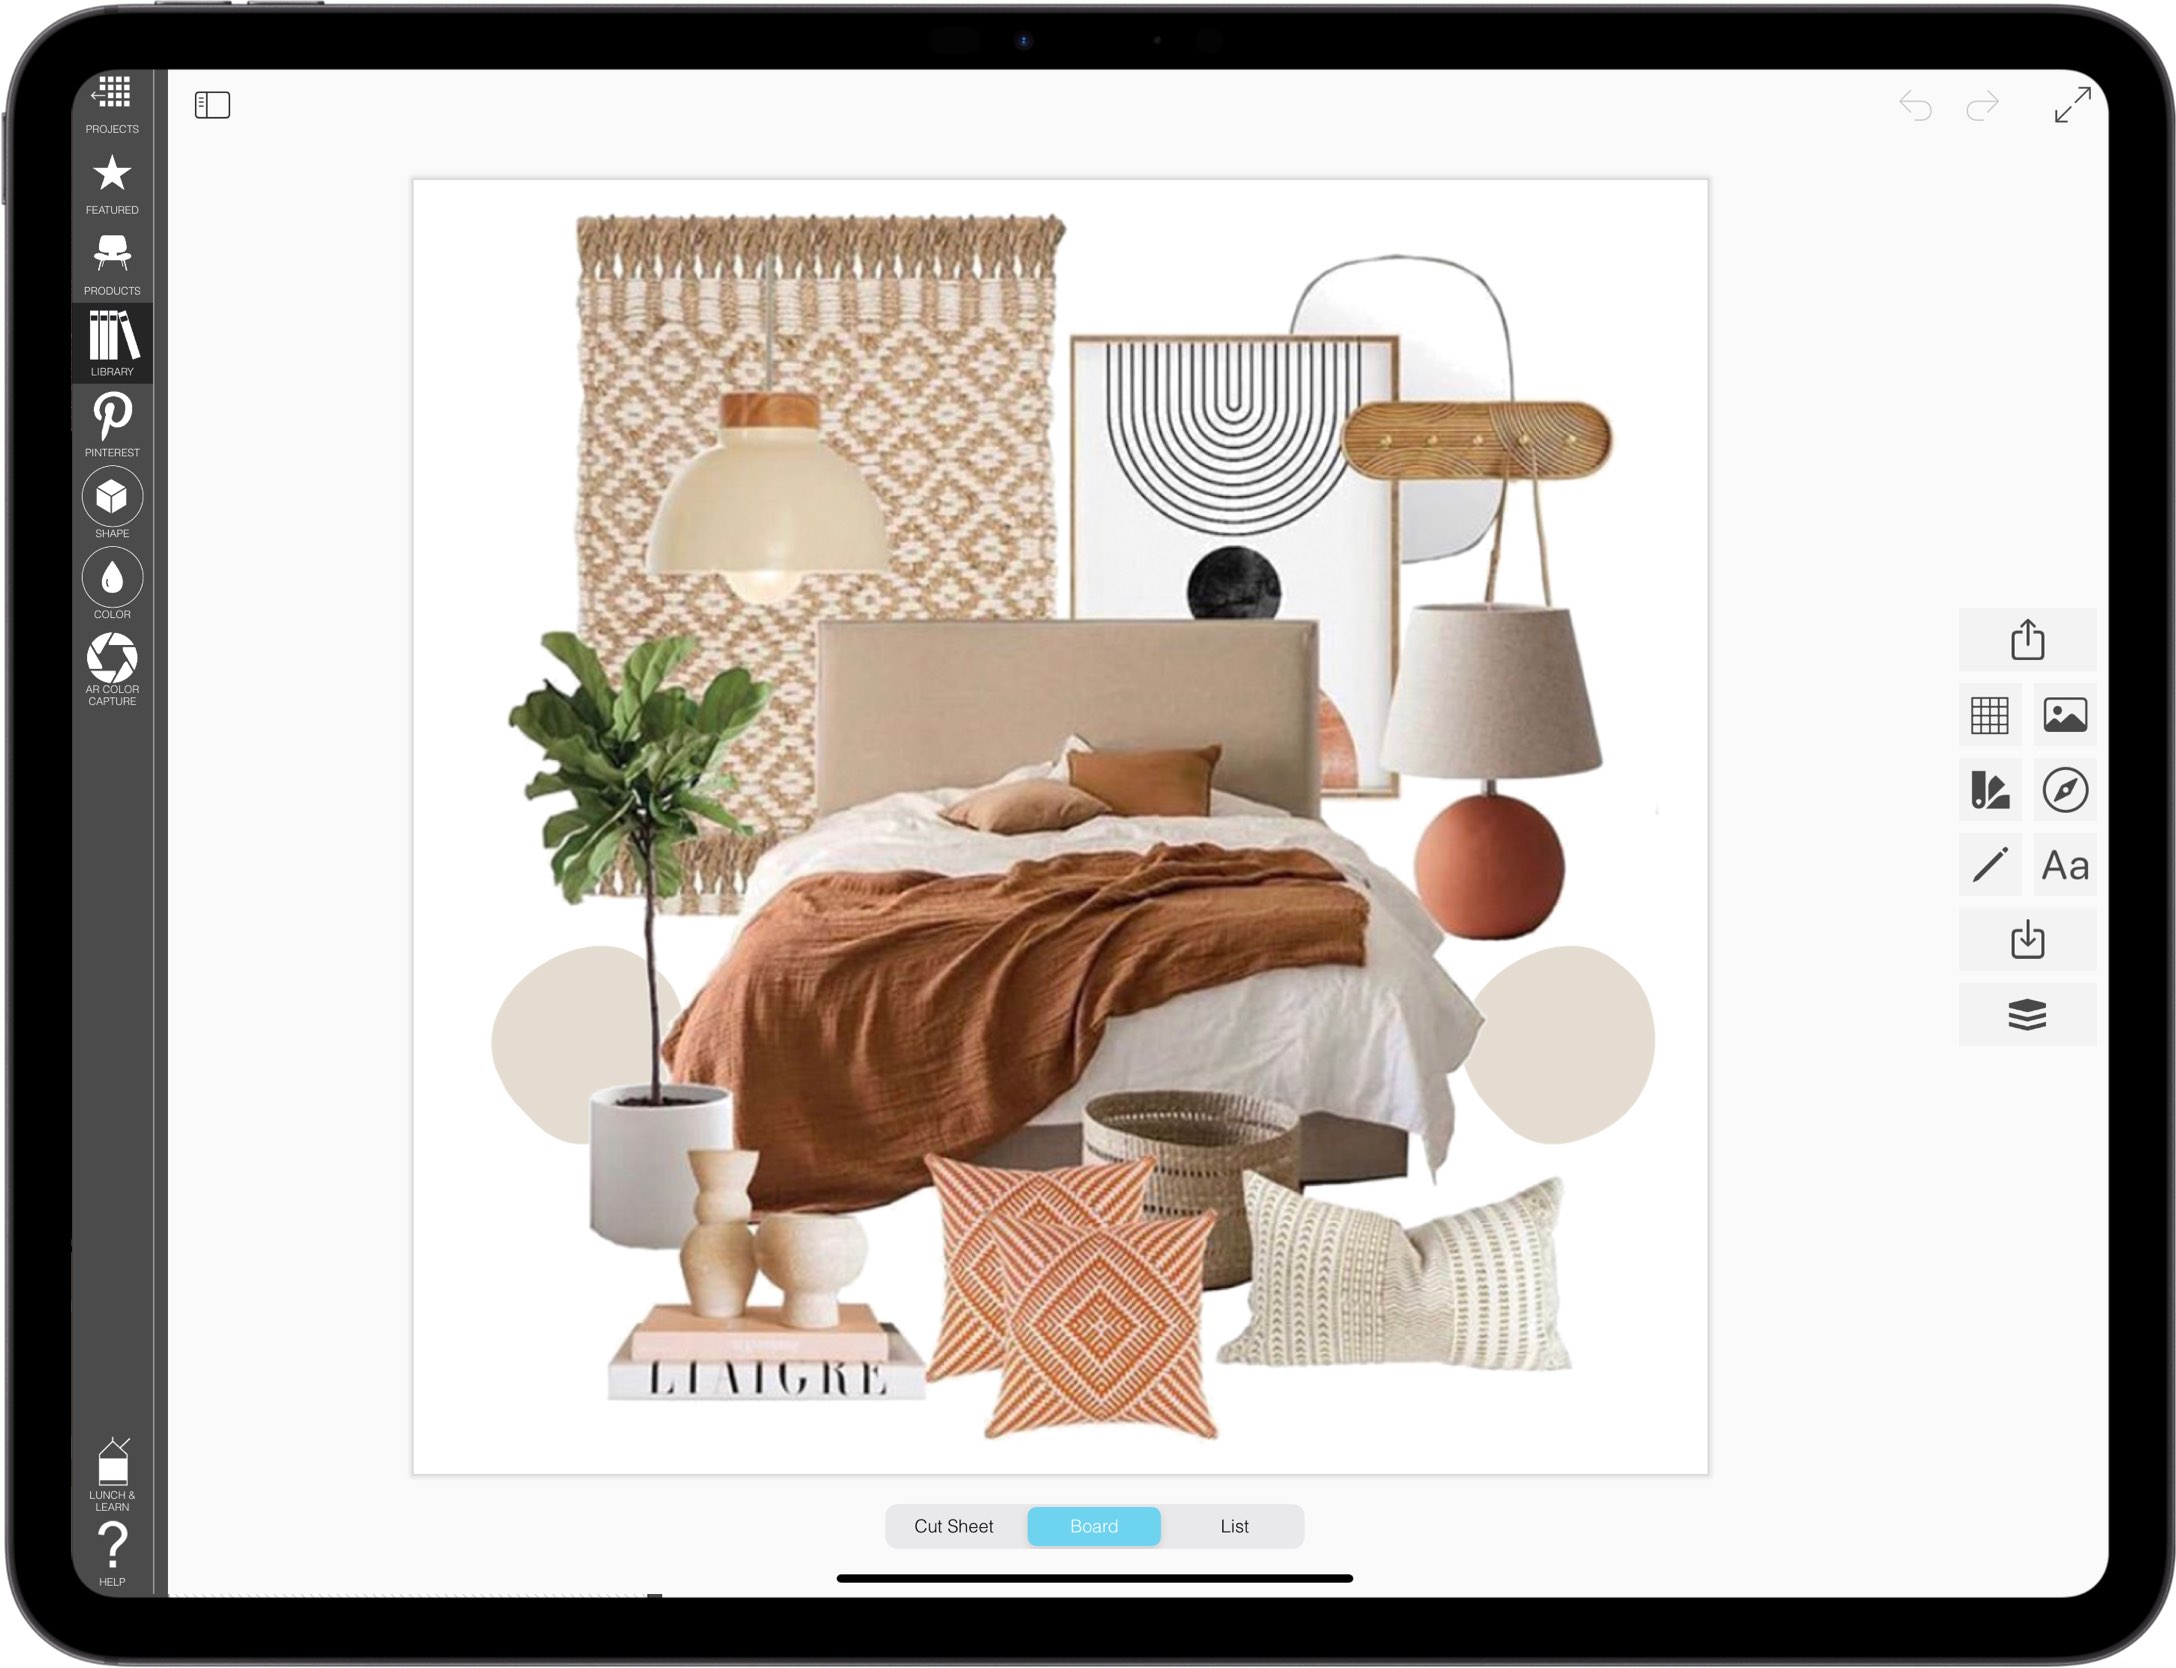 best home decor app for iPad moodboard maker_moodboards_mood board maker_01_Bedroom mood board